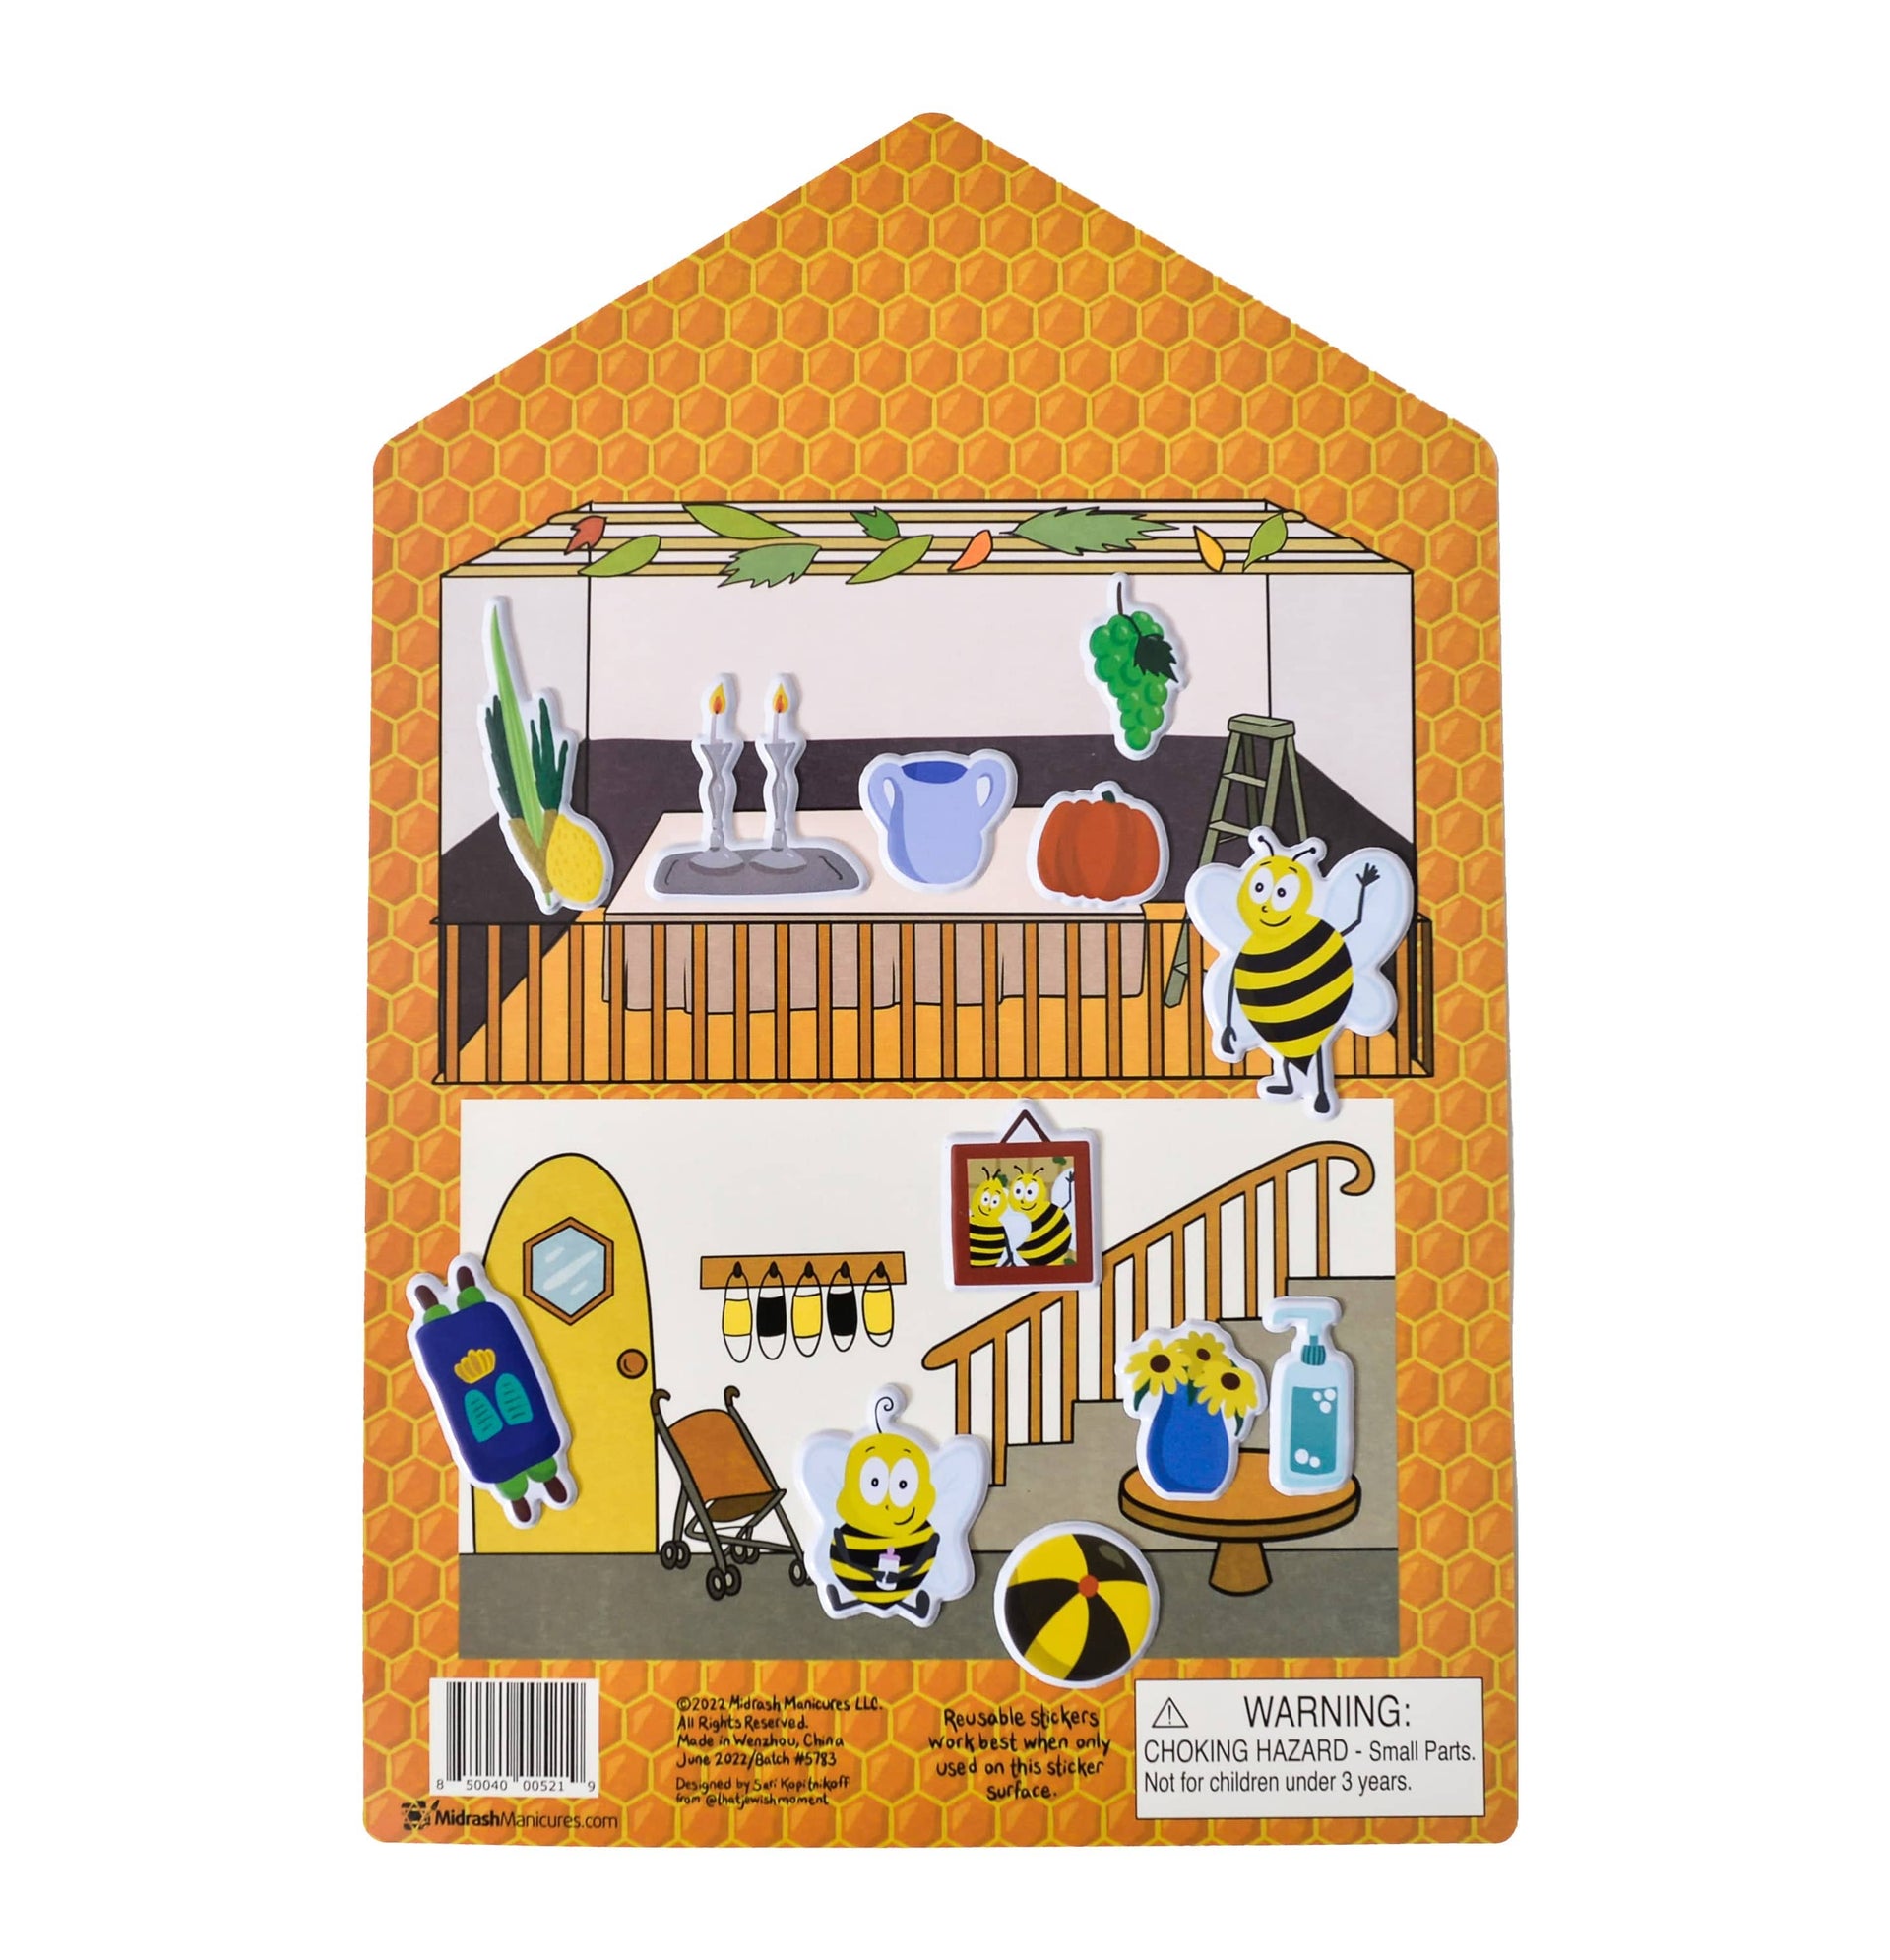 Midrash Manicures Toys High Holiday Hive by Midrash Manicures